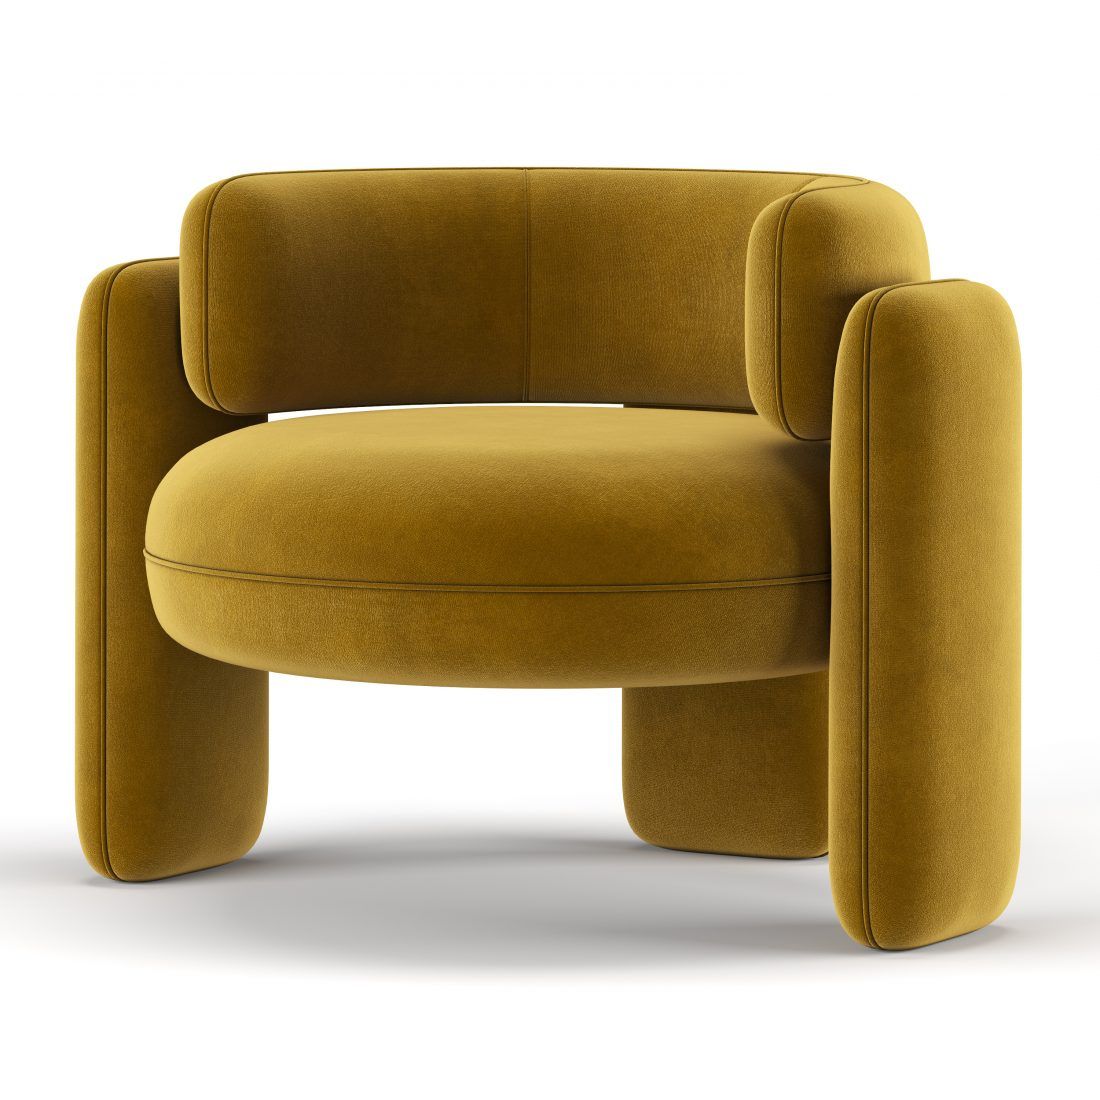 Comfortable Seating: Arm Chairs That
Blend Style with Comfort